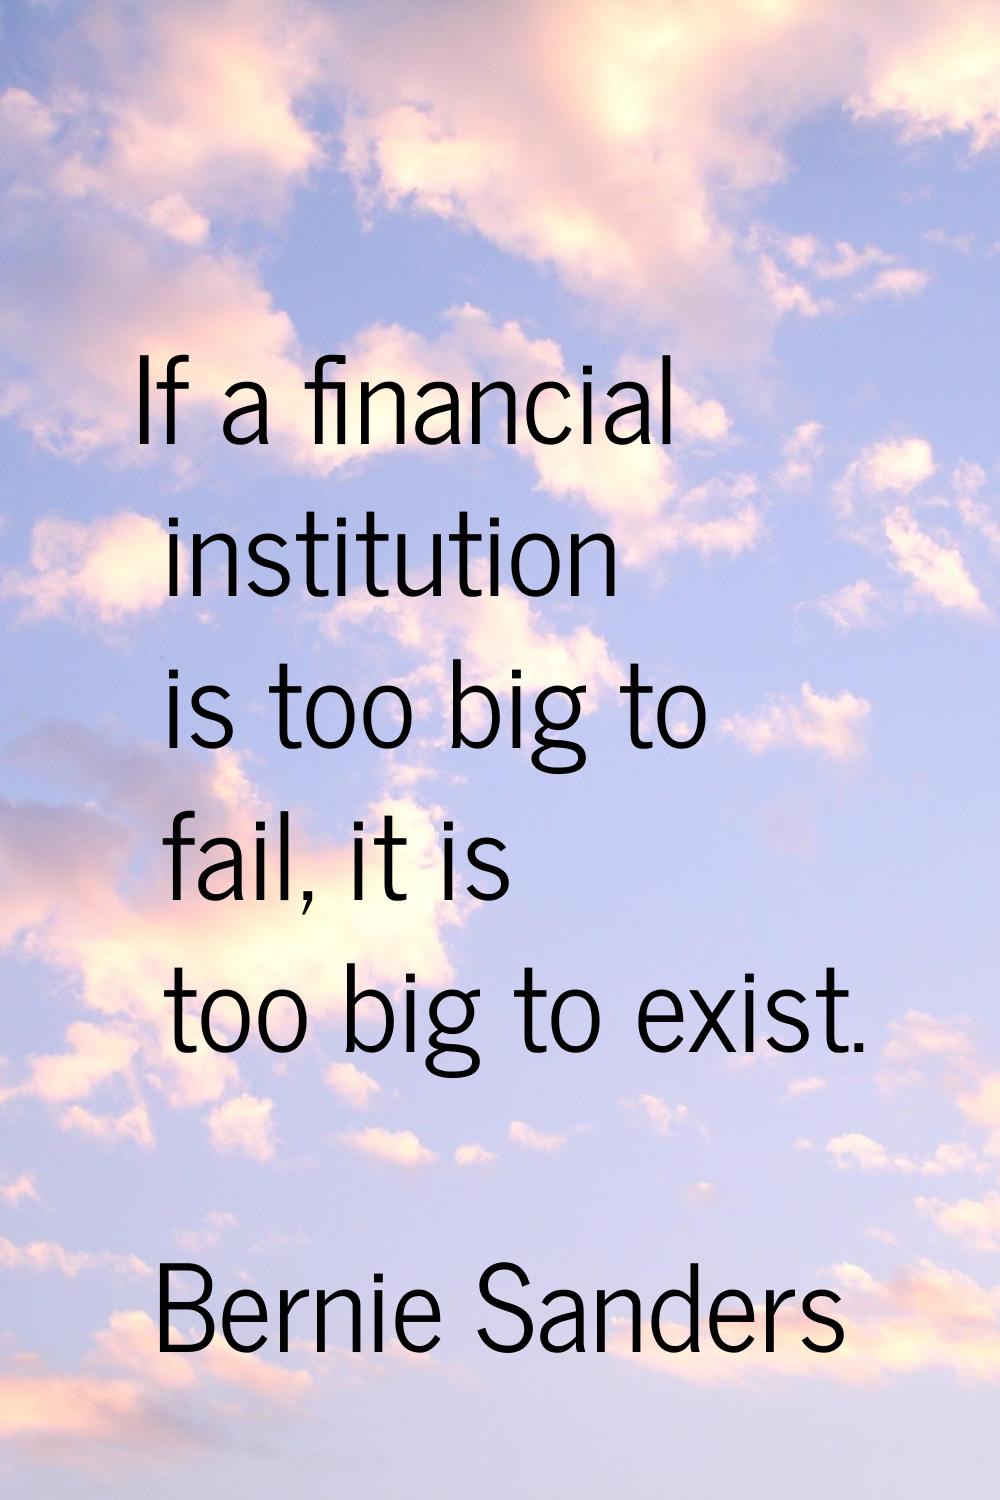 If a financial institution is too big to fail, it is too big to exist.